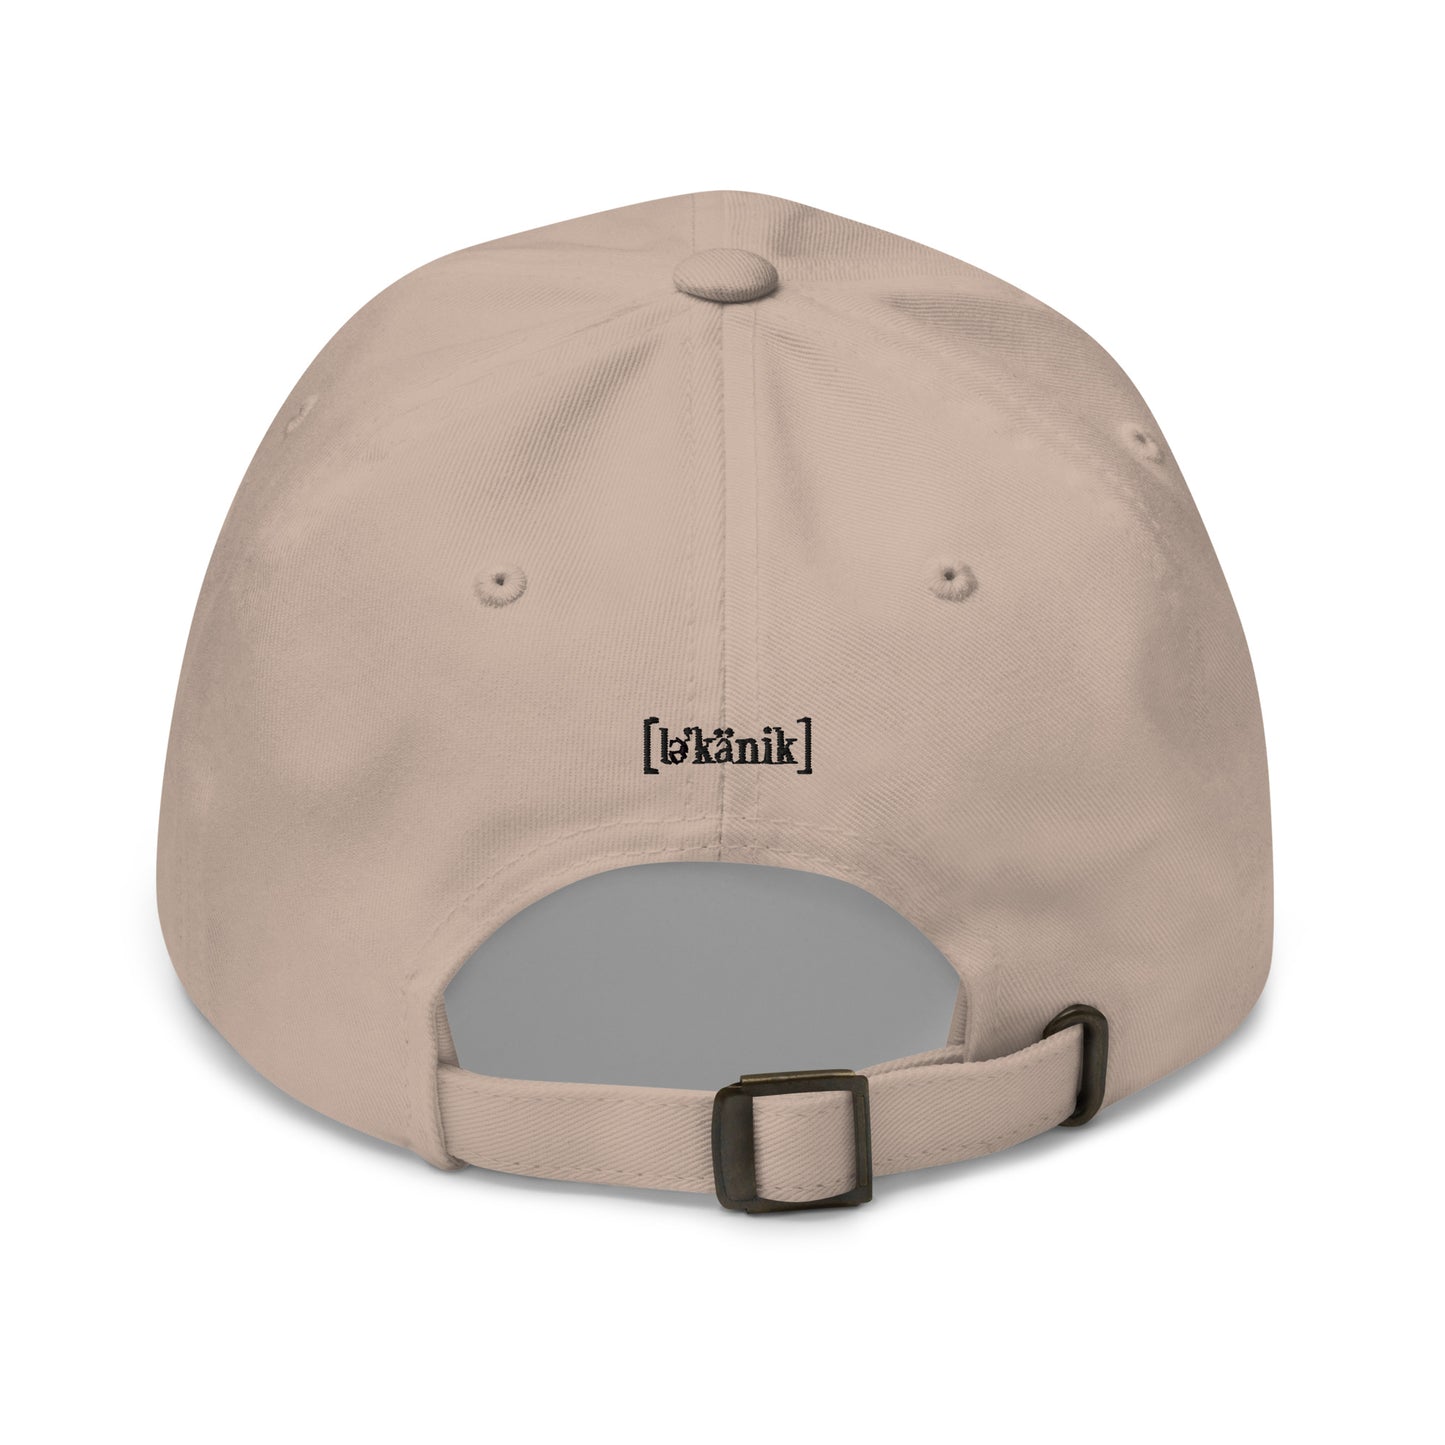 "The" Dad Hat